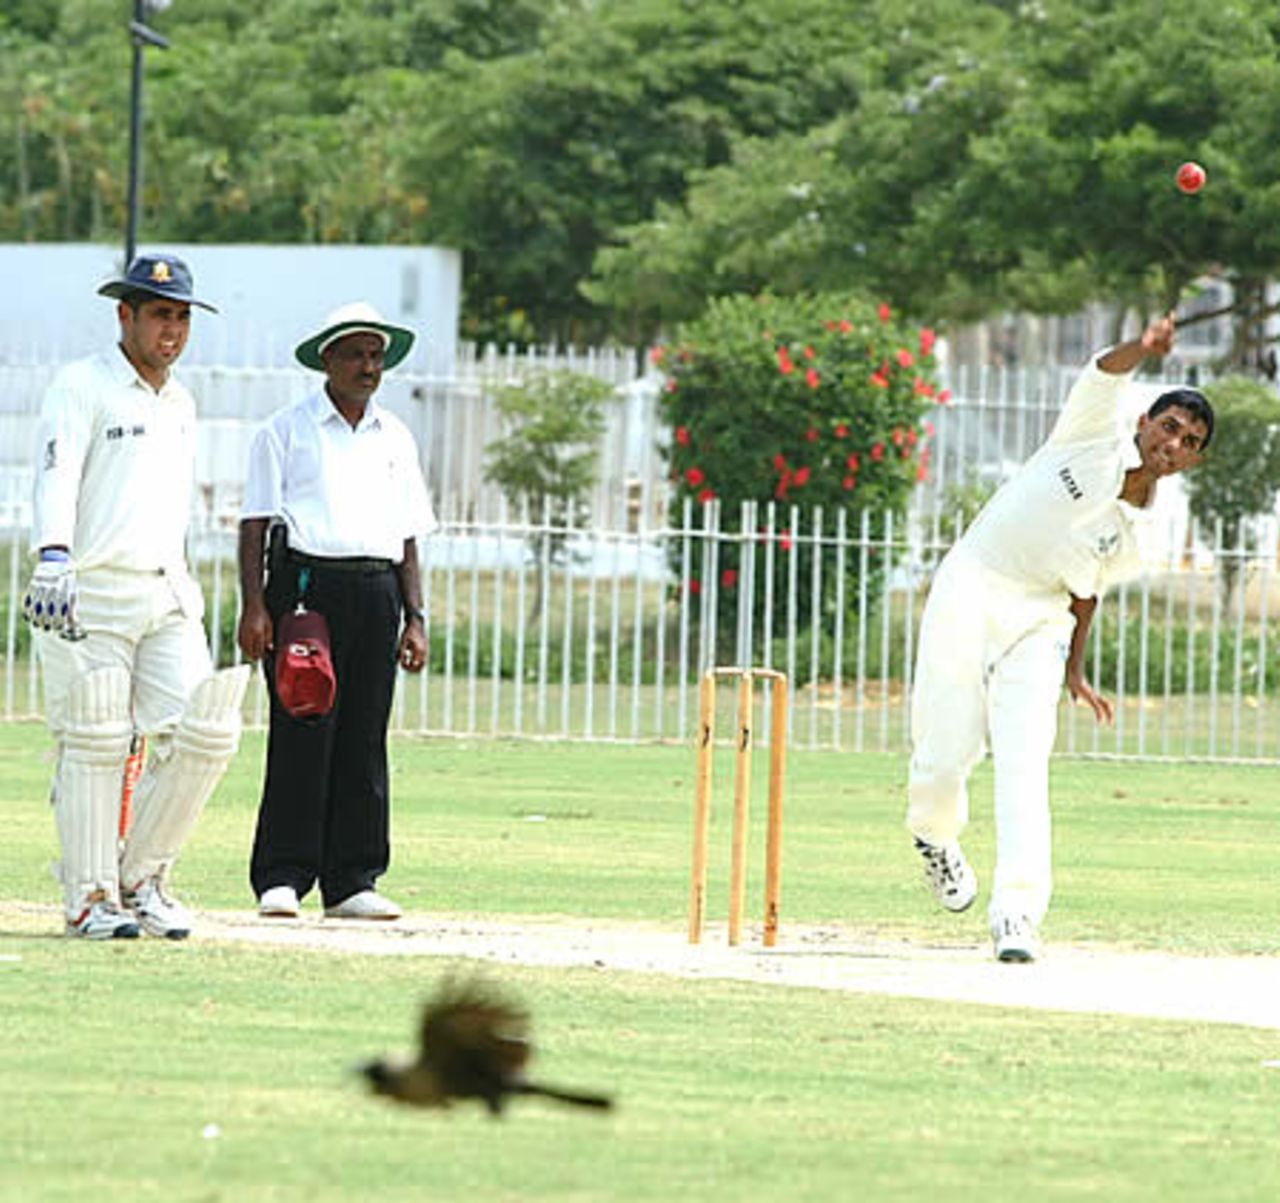 Mohammad Emran of Qatar bowls while a bird does a flypast, Qatar Under-19s v United Arab Emirates Under-19s at United Bank Ltd Sports Complex Karachi, Youth Asia Cup 2003, 16 July 2003.